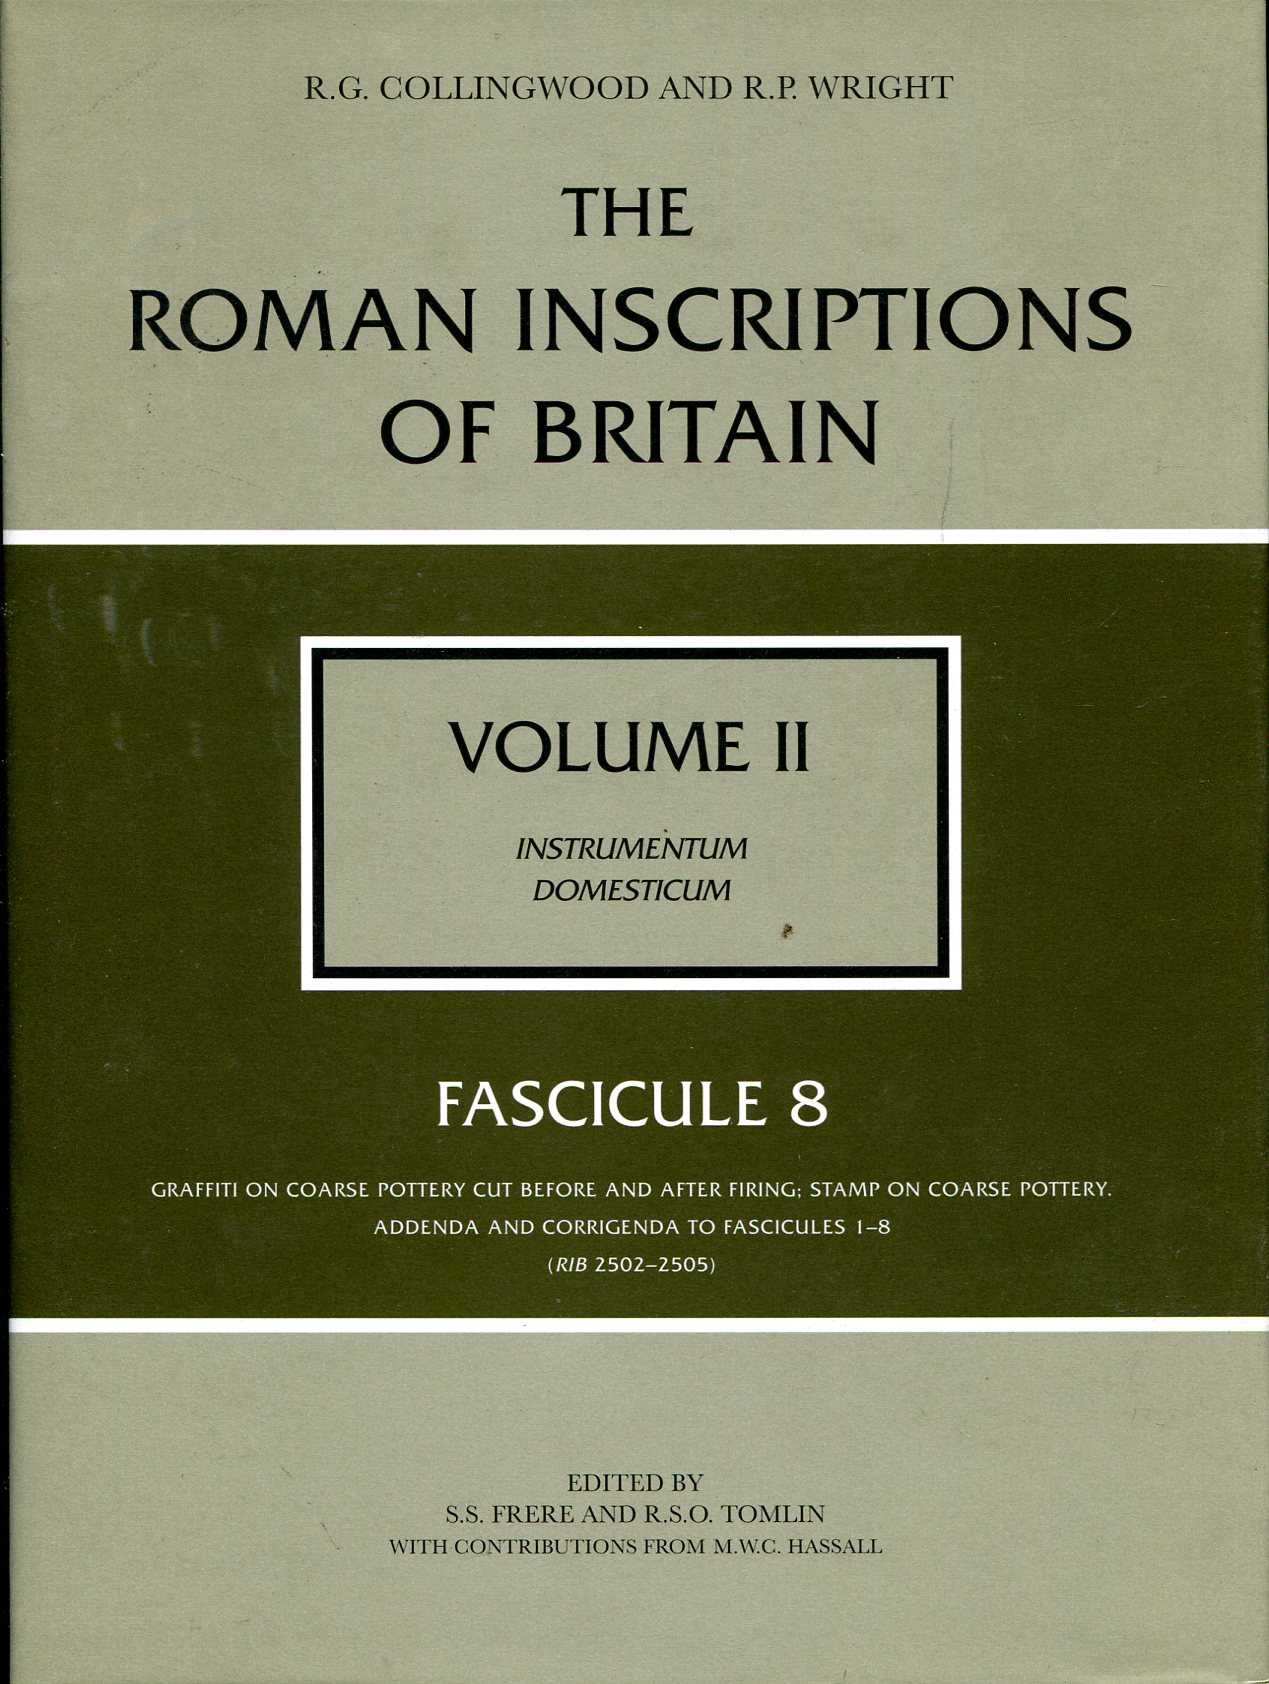 The Roman Inscriptions of Britain: Instrumentum Domesticum volume II : Fasicule 8 - Graffiti on coarsepottery cut before and after firing; stamp on coarse pottery, Addenda and Corrigenda to Fasicules 1-8 - Collingwood, R. G.& Wright, R.P. (edited by S S Frere & R S O Tomlin)